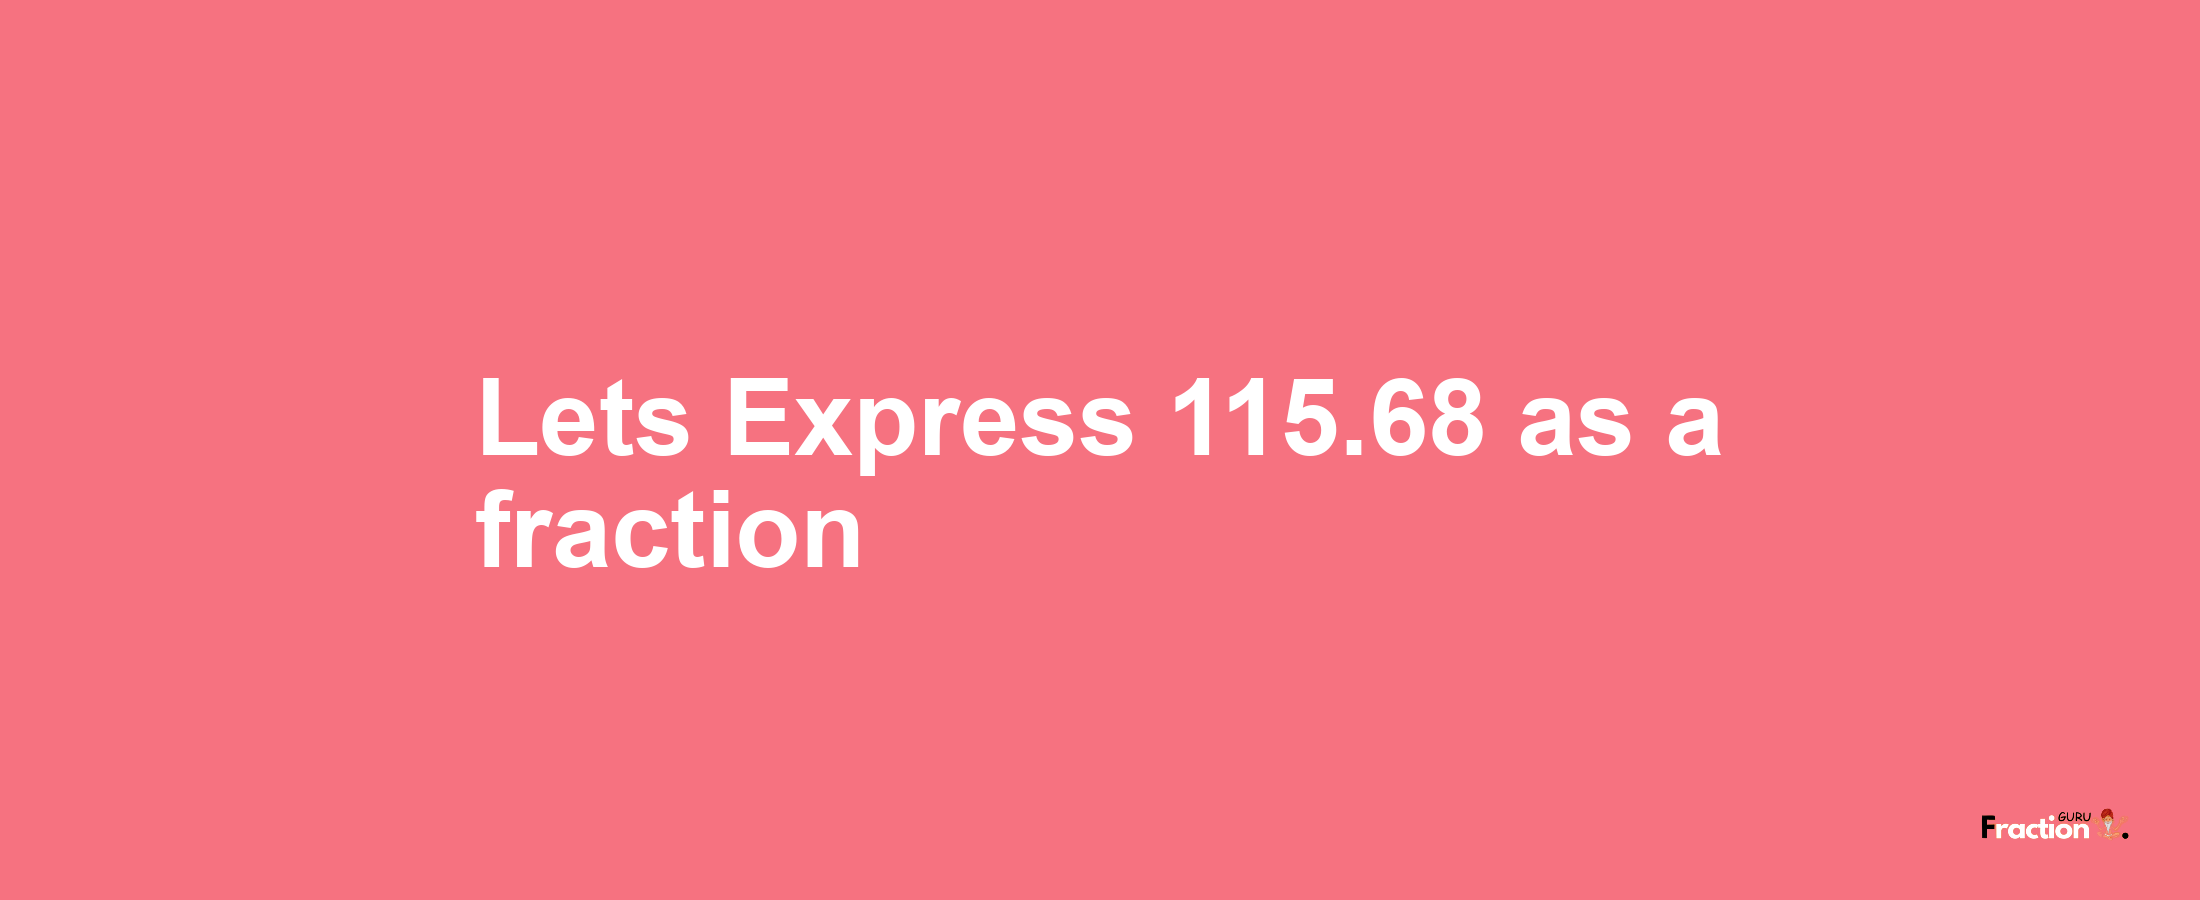 Lets Express 115.68 as afraction